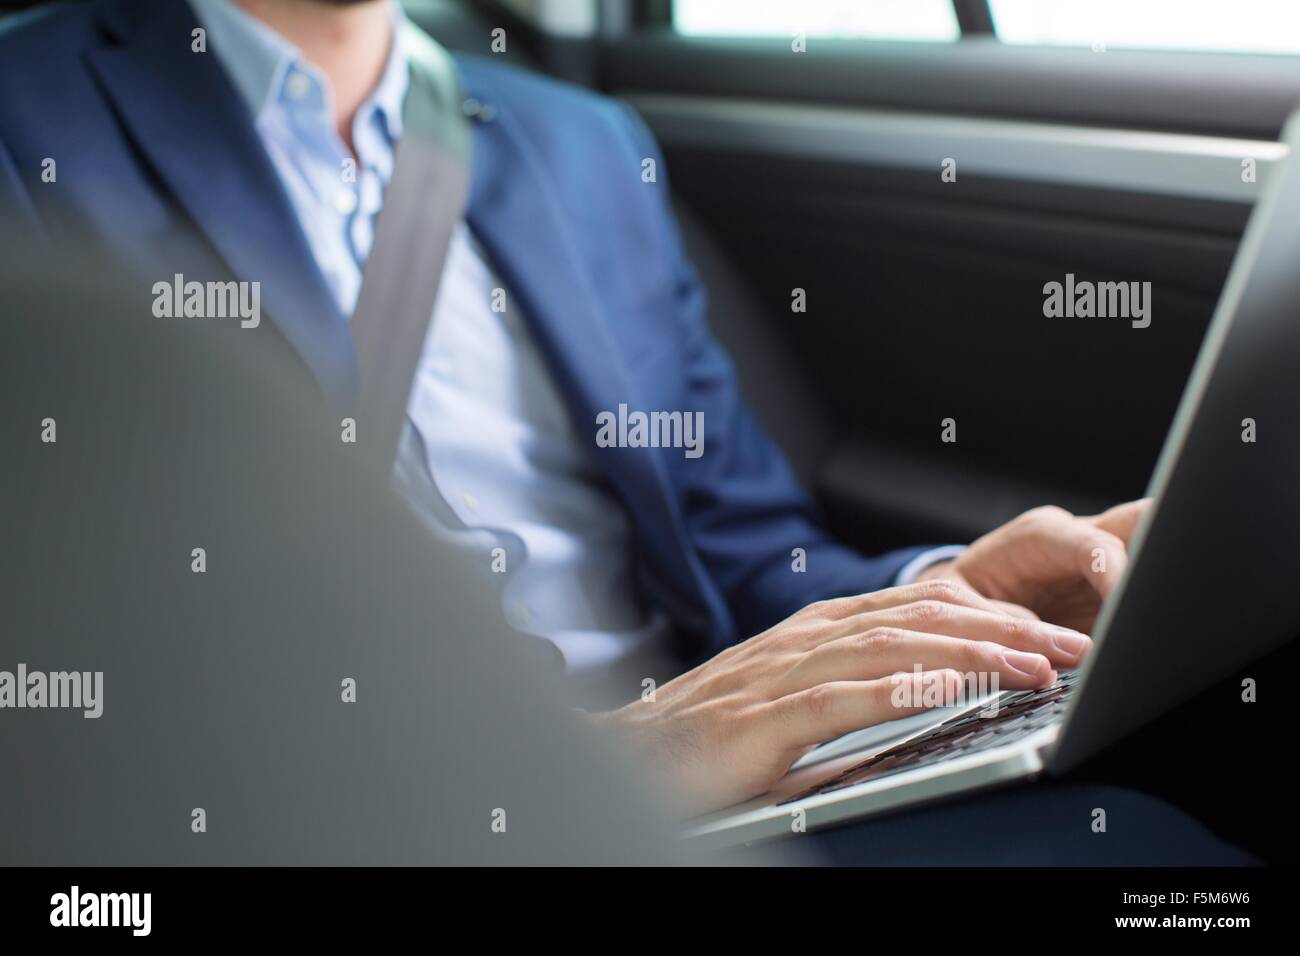 Young businessman chatting typing on laptop in back seat of car Stock Photo